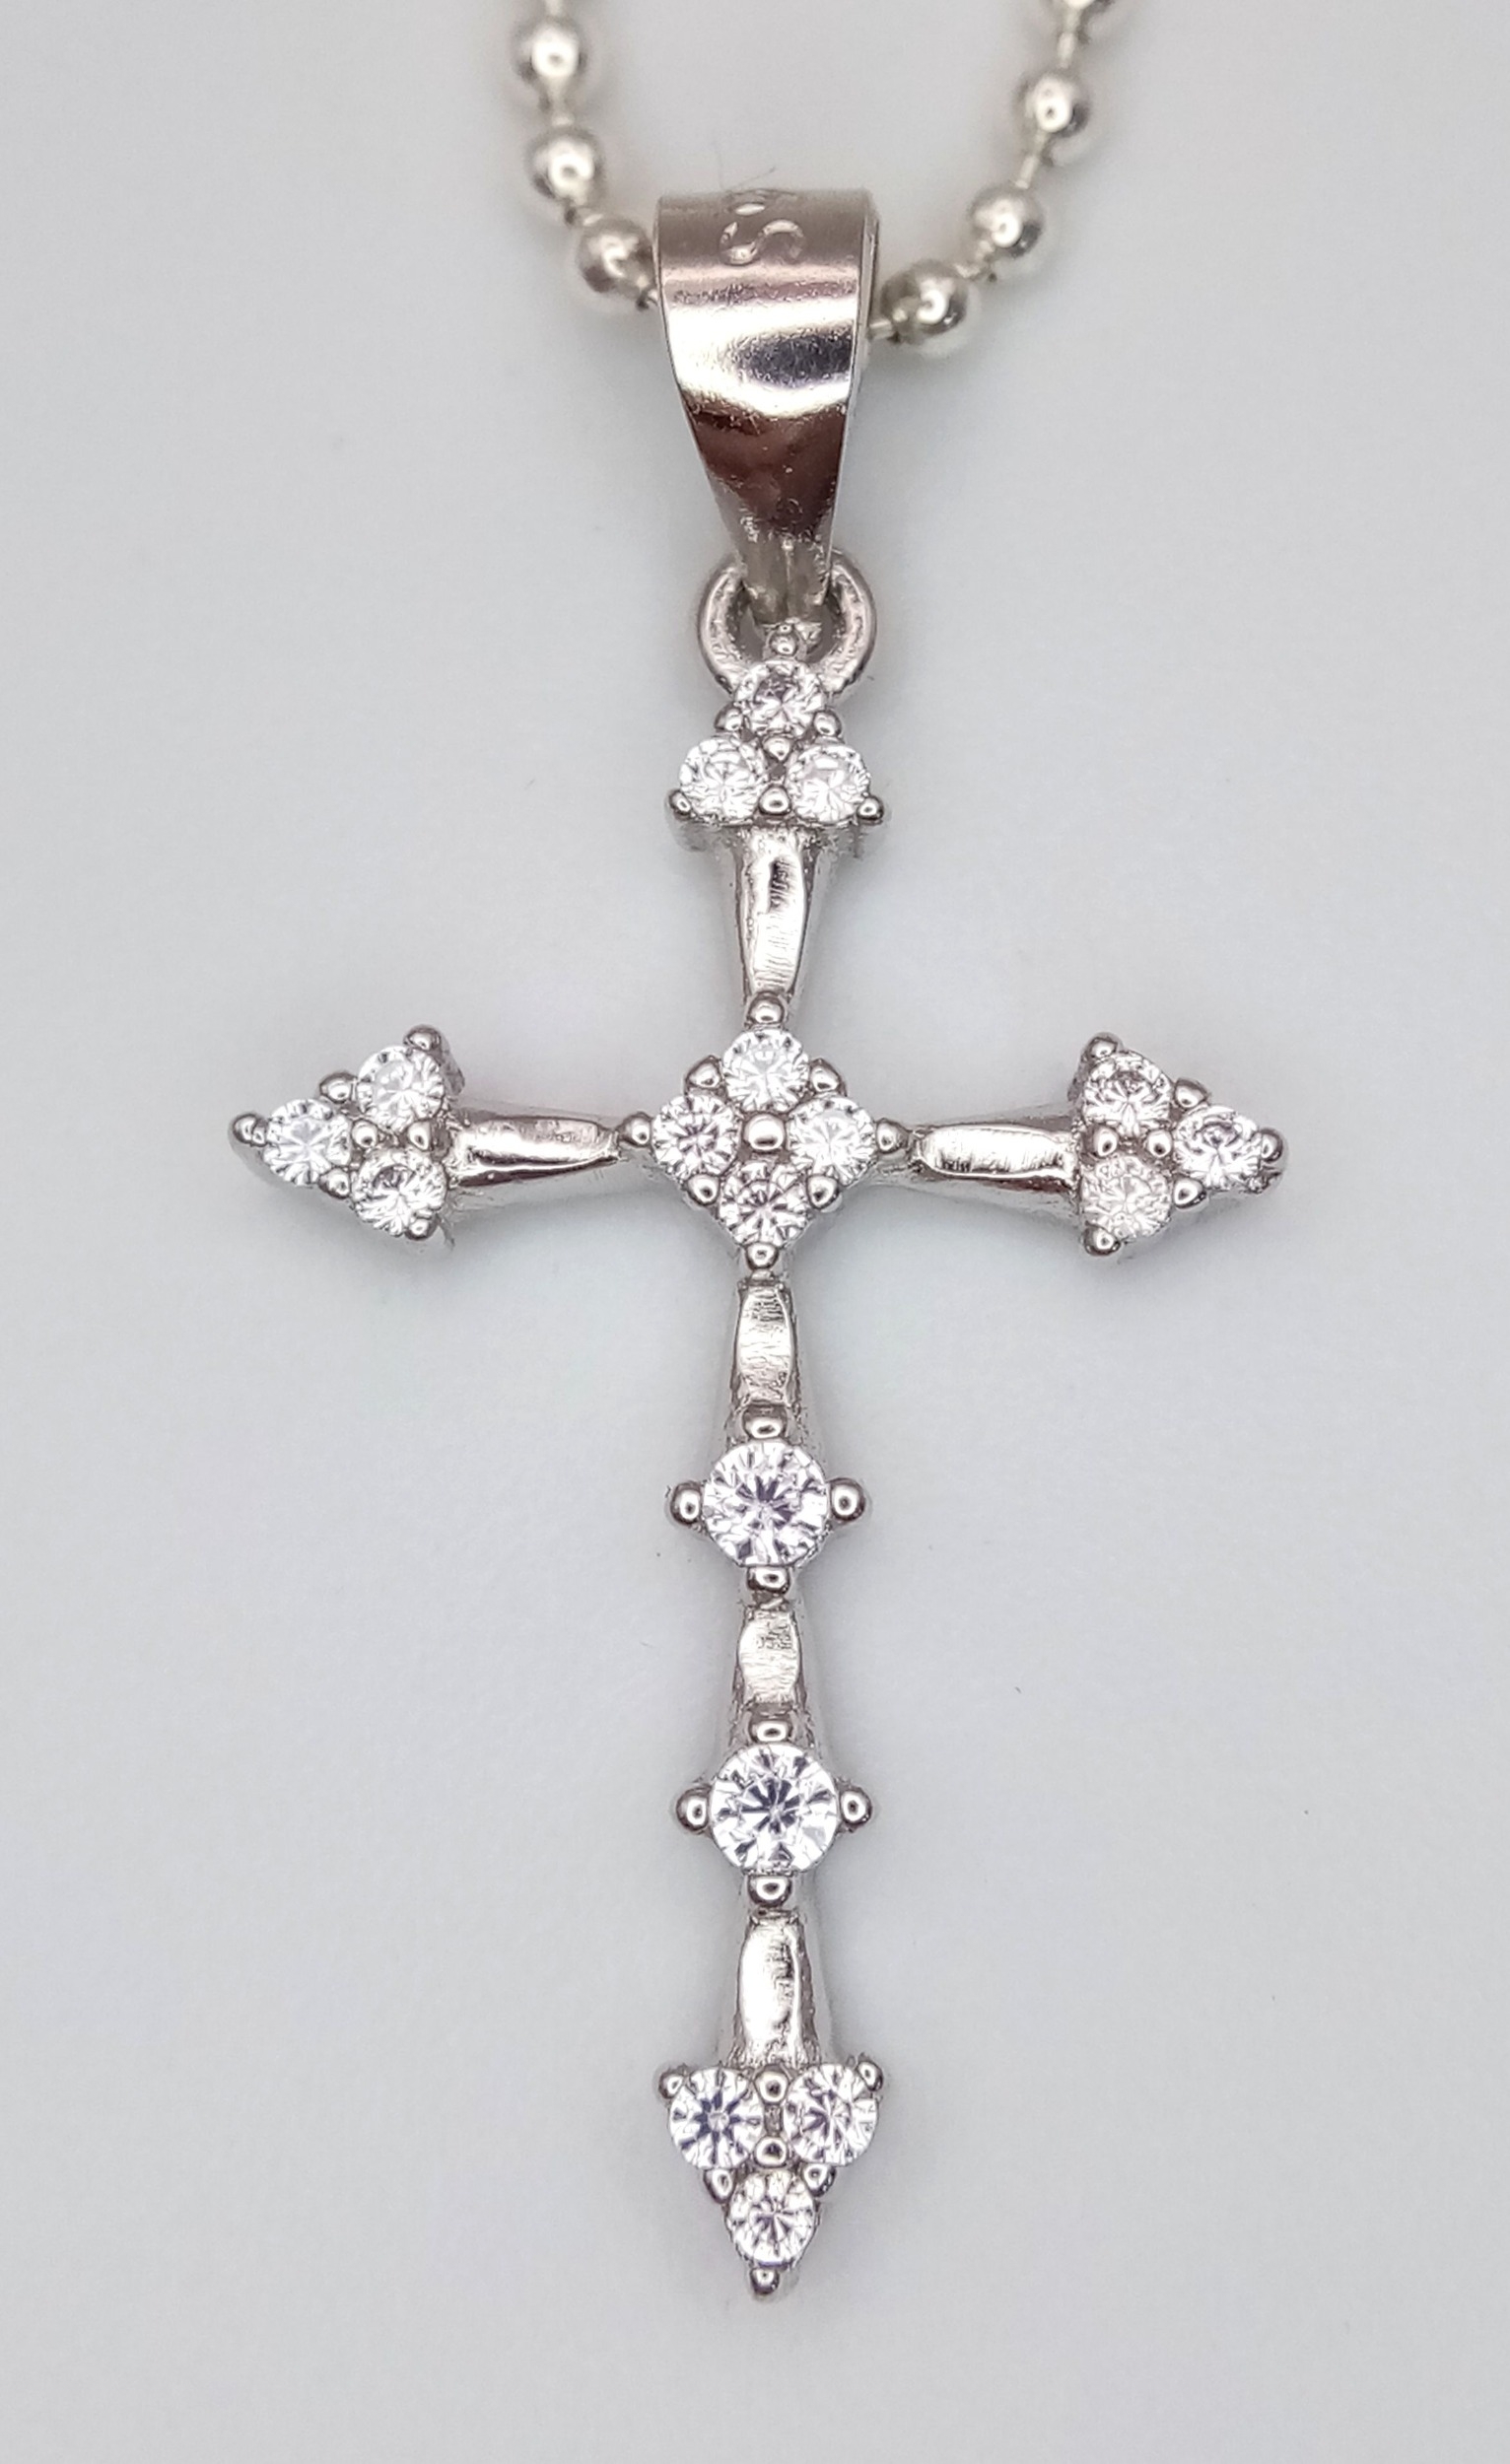 A 925 Silver Cross Pendant on a 925 Silver Chain. 3cm and 40cm. - Image 5 of 5